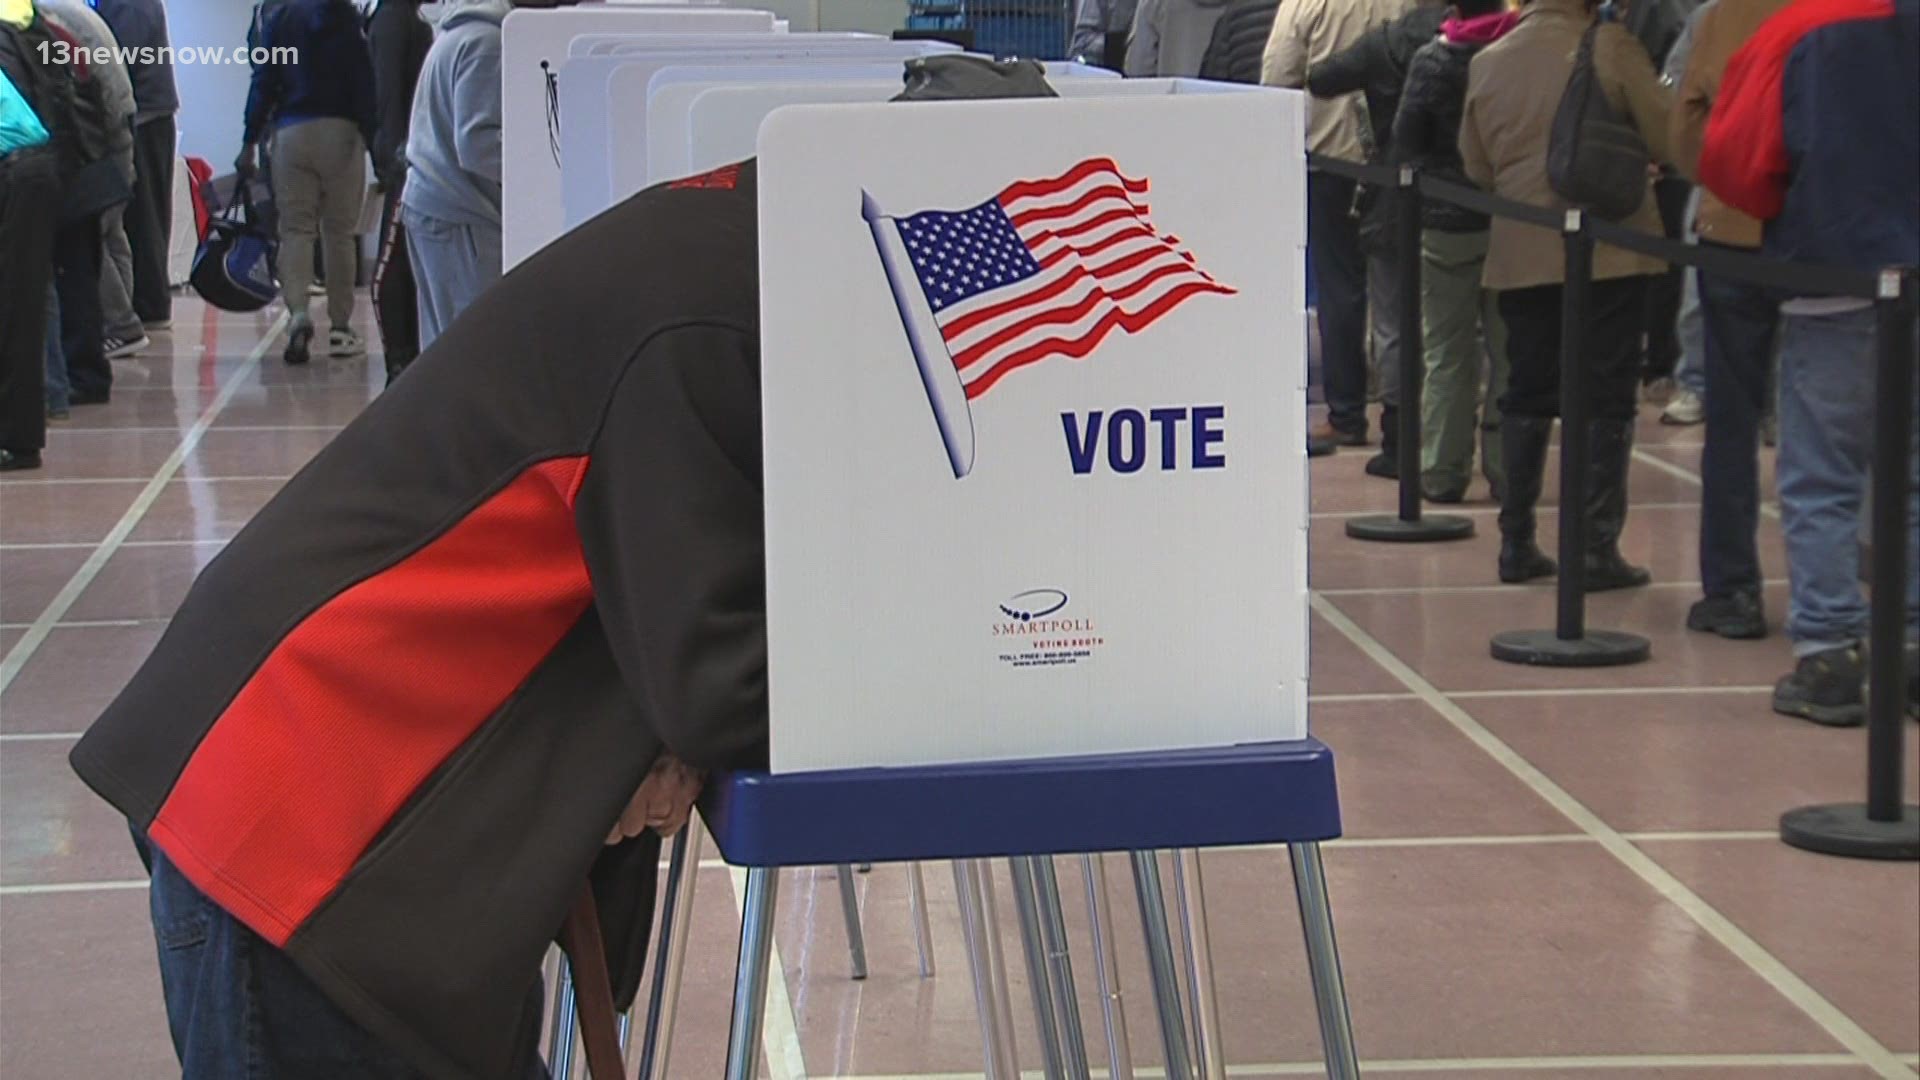 The City of Virginia Beach has declared Election Day as a holiday which will give some city workers a day off.